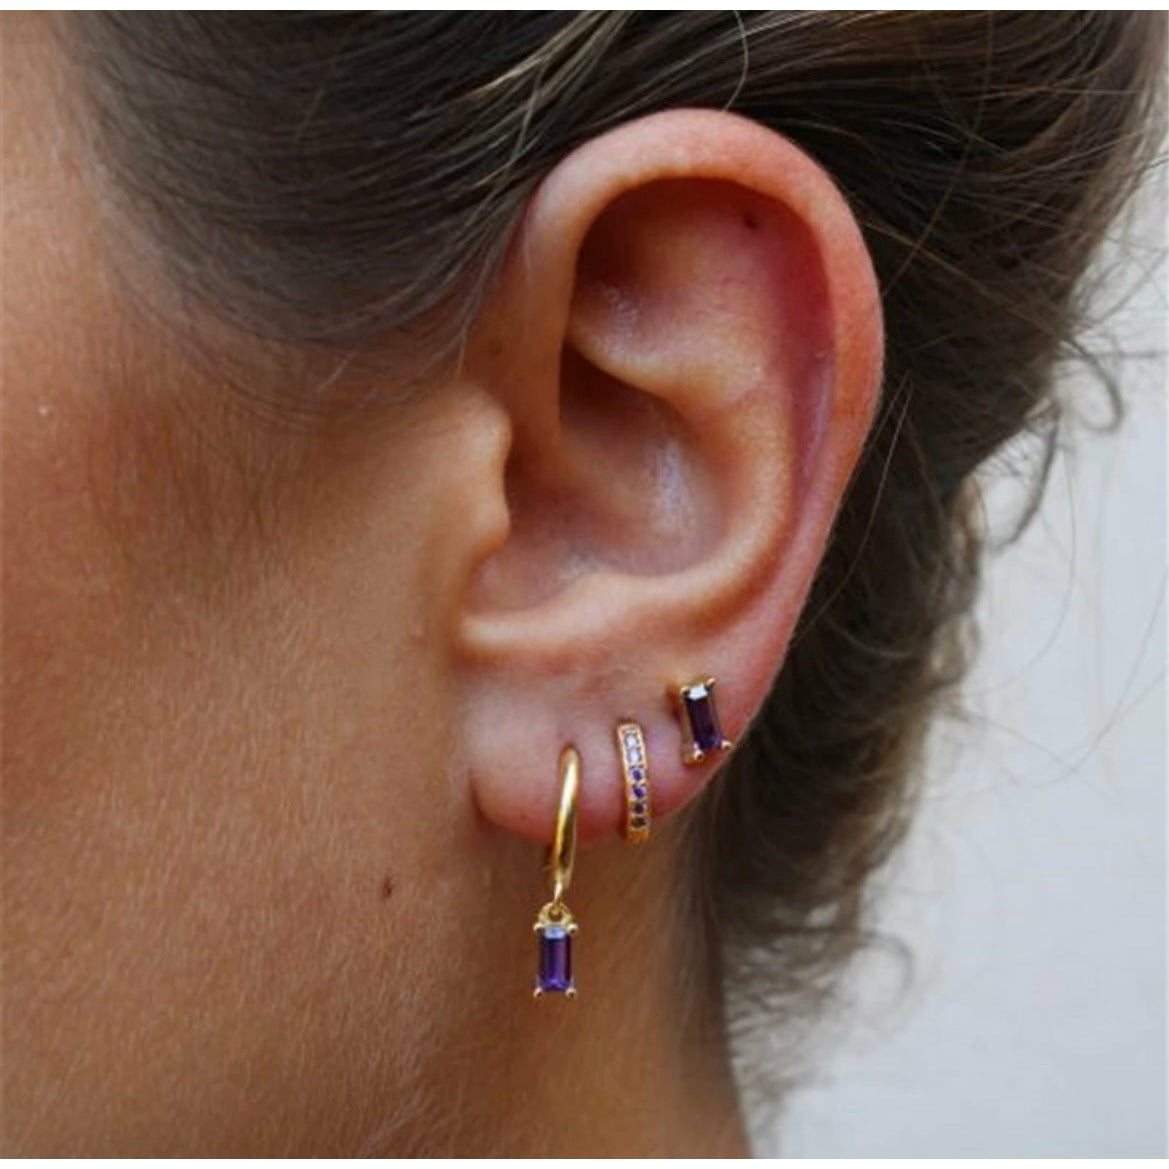 Gold Plated Amethyst Ear Stack